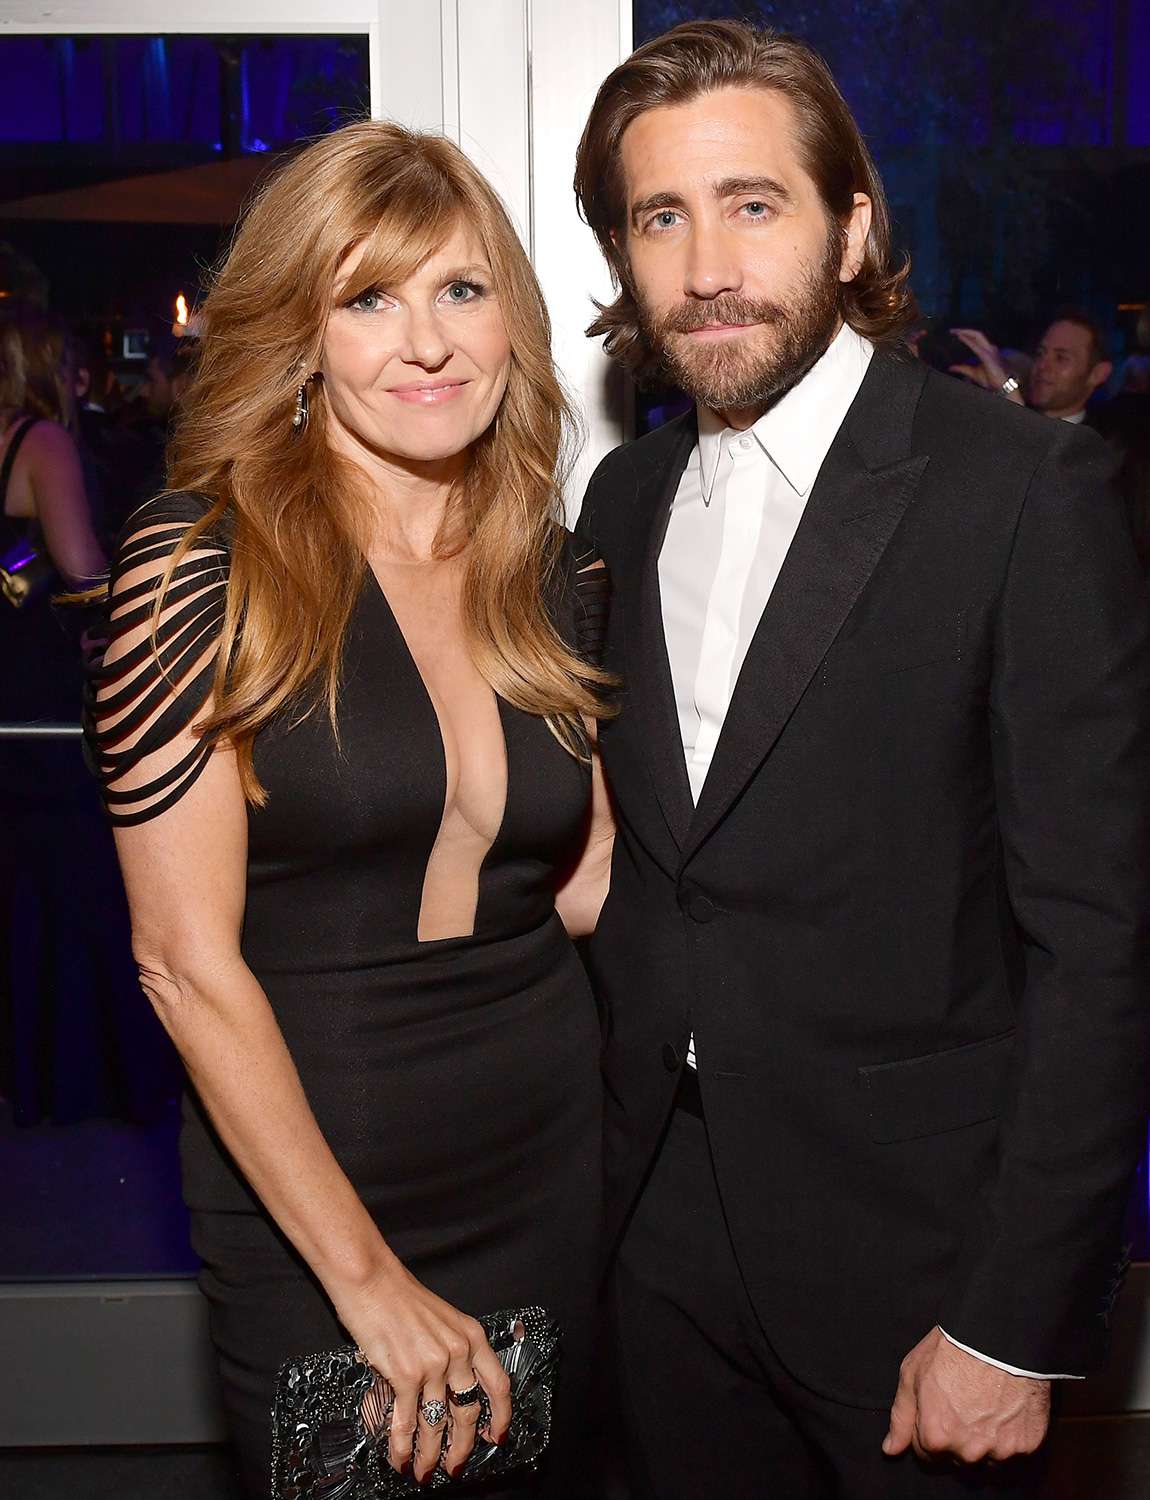 Jake Gyllenhaal and Connie Britton attend the 2020 Vanity Fair Oscar Party hosted by Radhika Jones at Wallis Annenberg Center for the Performing Arts on February 09, 2020 in Beverly Hills, California